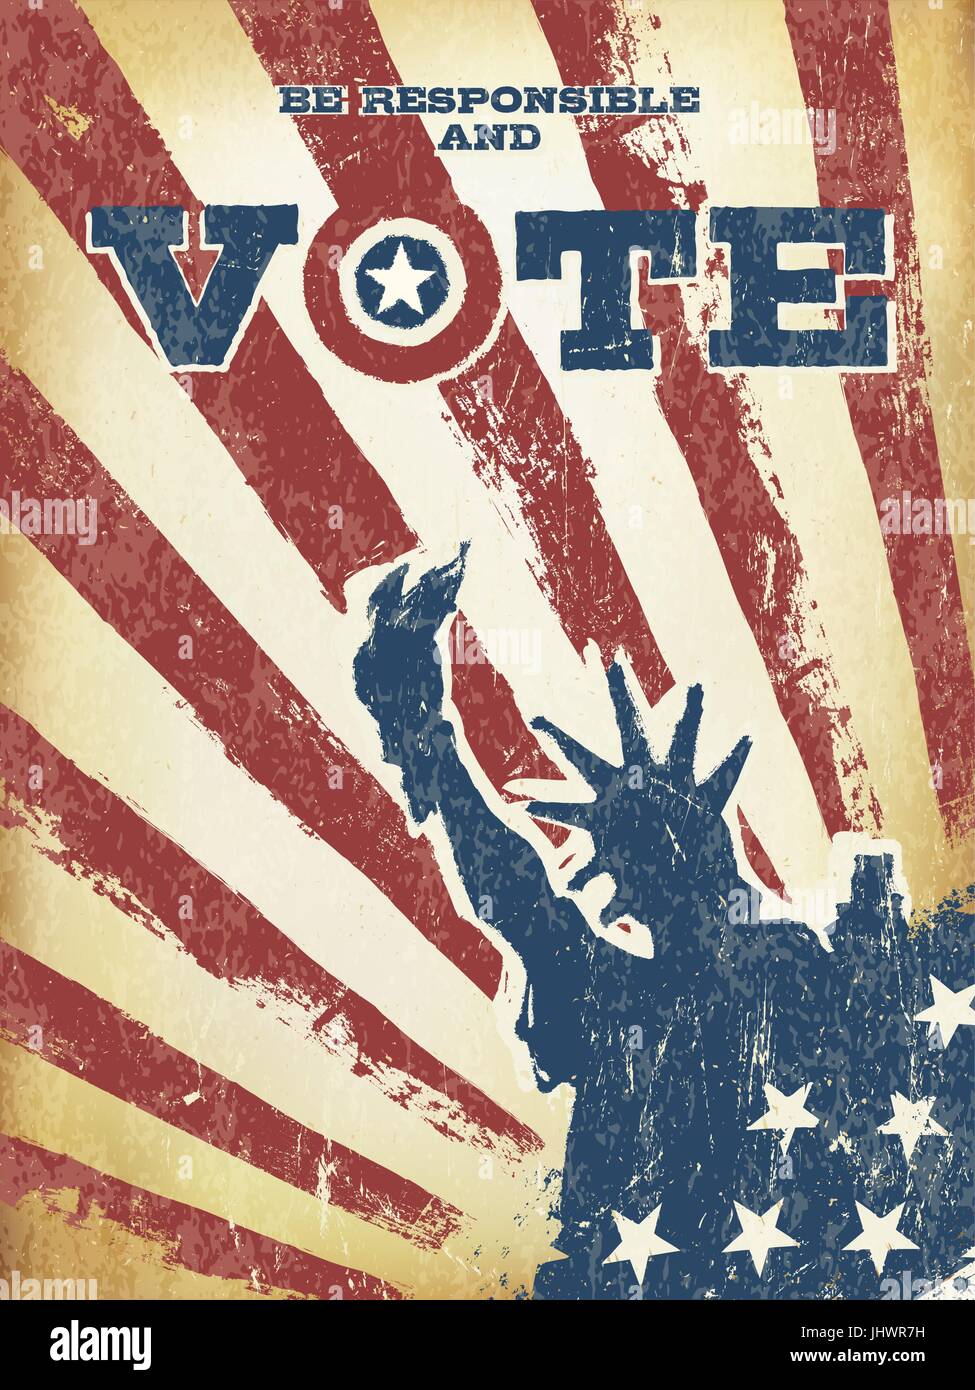 Be responsible and Vote! On USA map. Vintage patriotic poster to encourage voting in elections. Retro styled, aged layers can be easy removed. Stock Vector